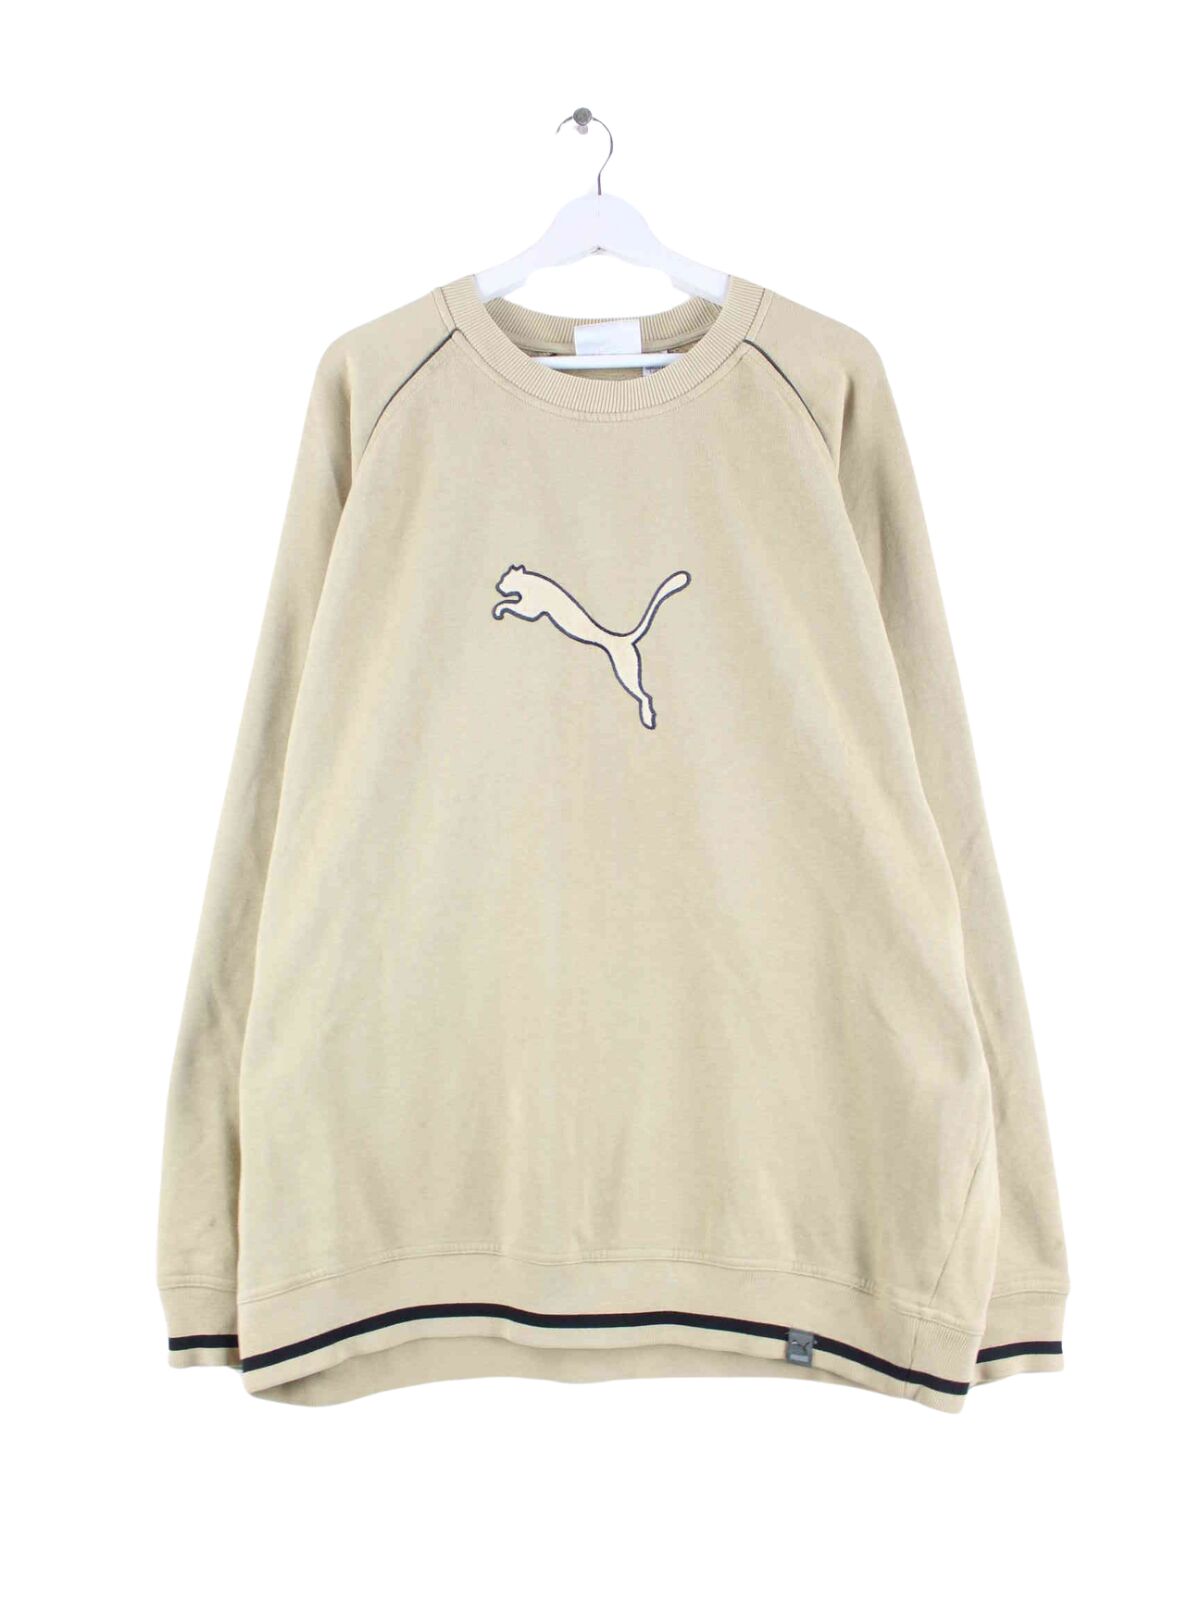 Puma 00s Embroidered Sweater Beige XL (front image)